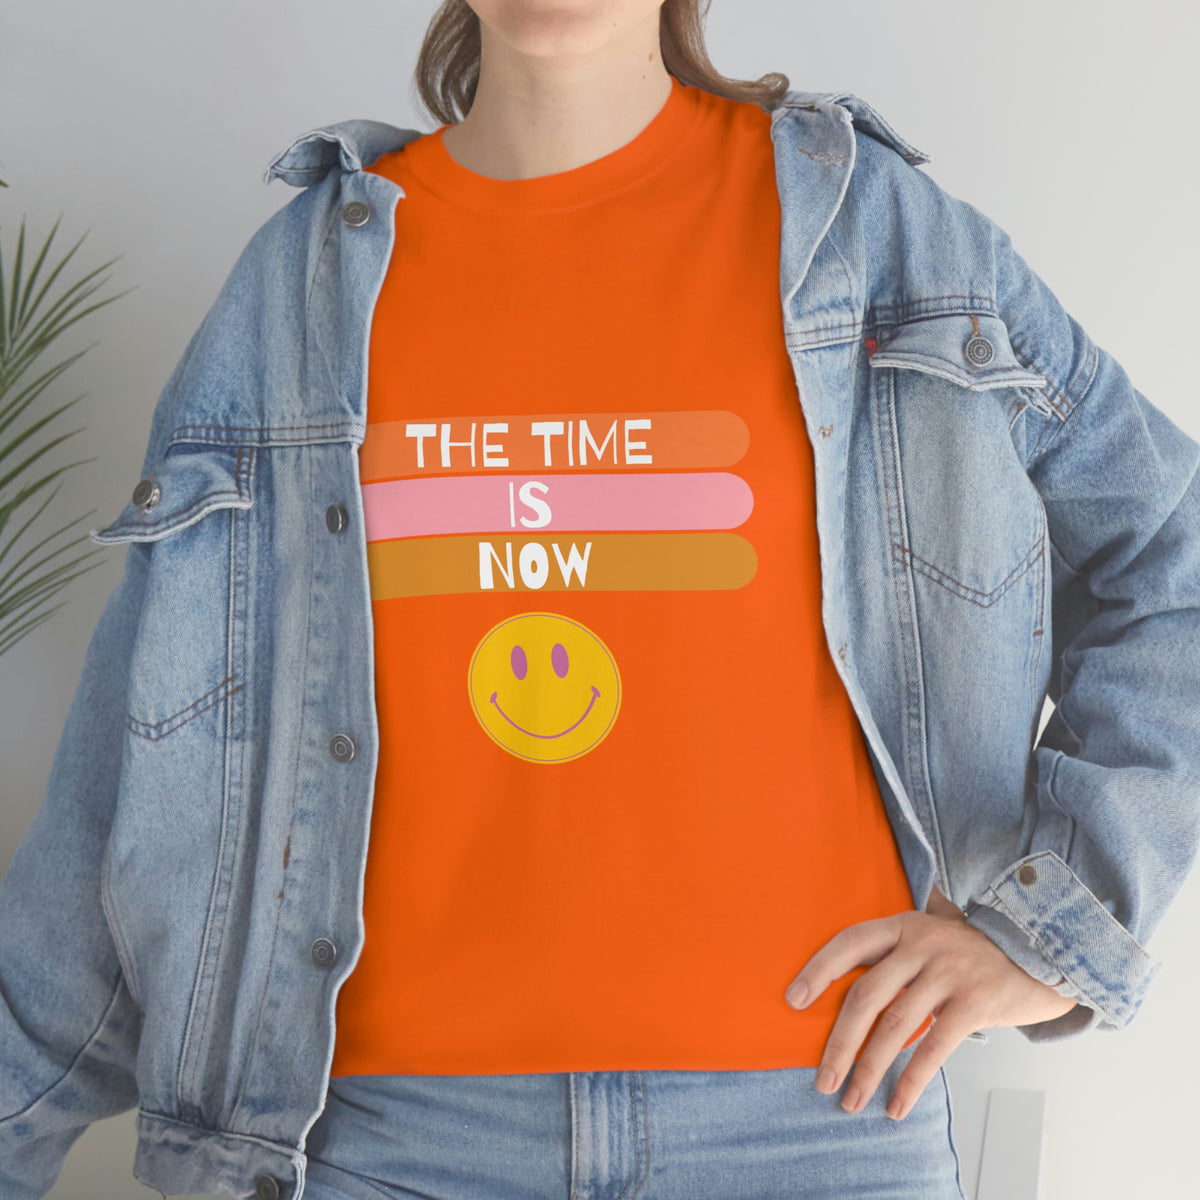 The Time is Now Tee, Inspiring TShirt, Uplifting Pullover, Now is the Time Top, Live Your Dreams Top